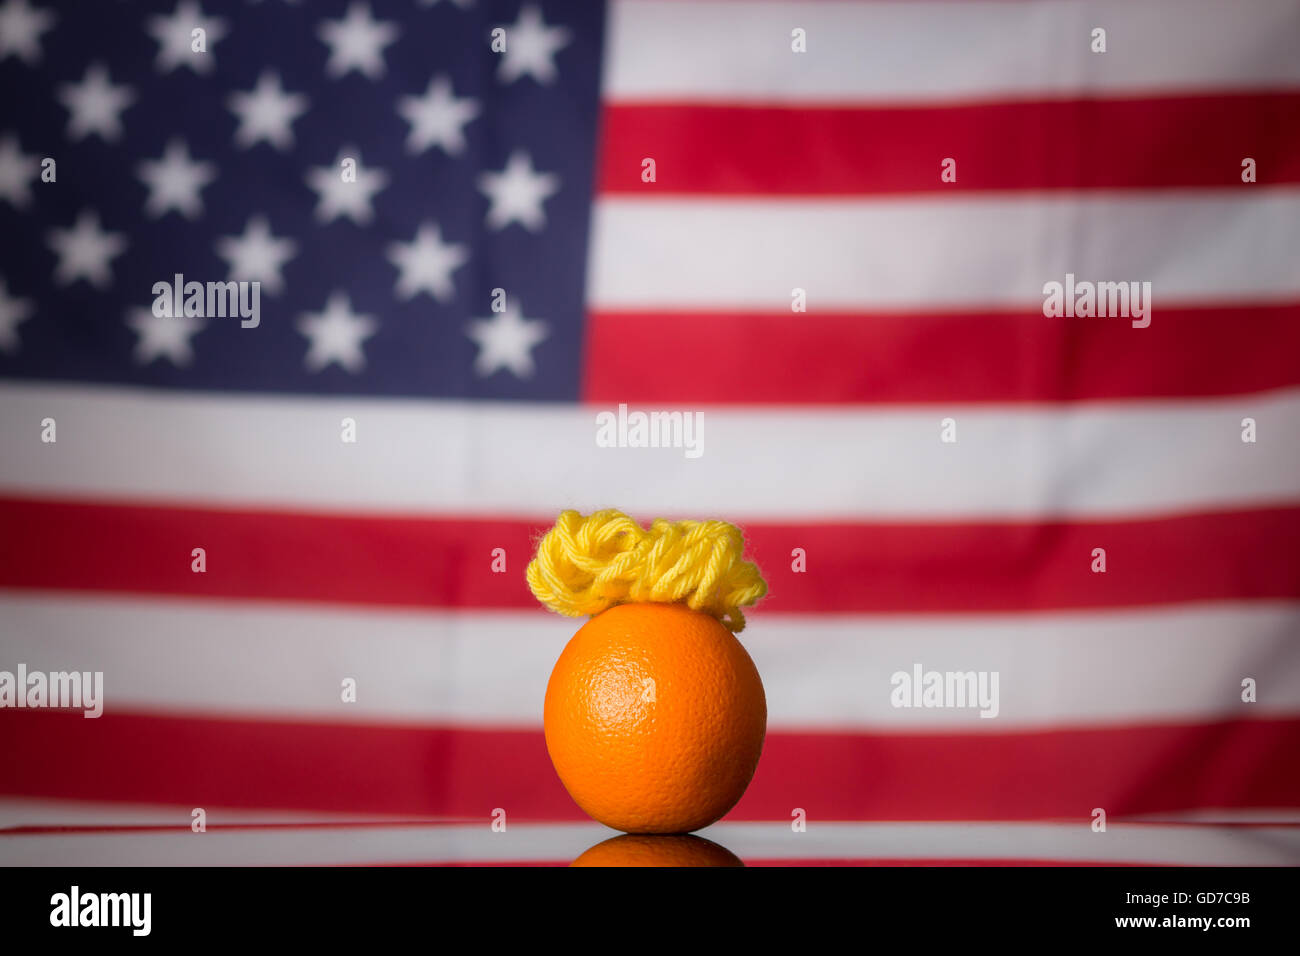 A satirical photo of an Orange made to look like US presidential candidate Donald Trump. Stock Photo